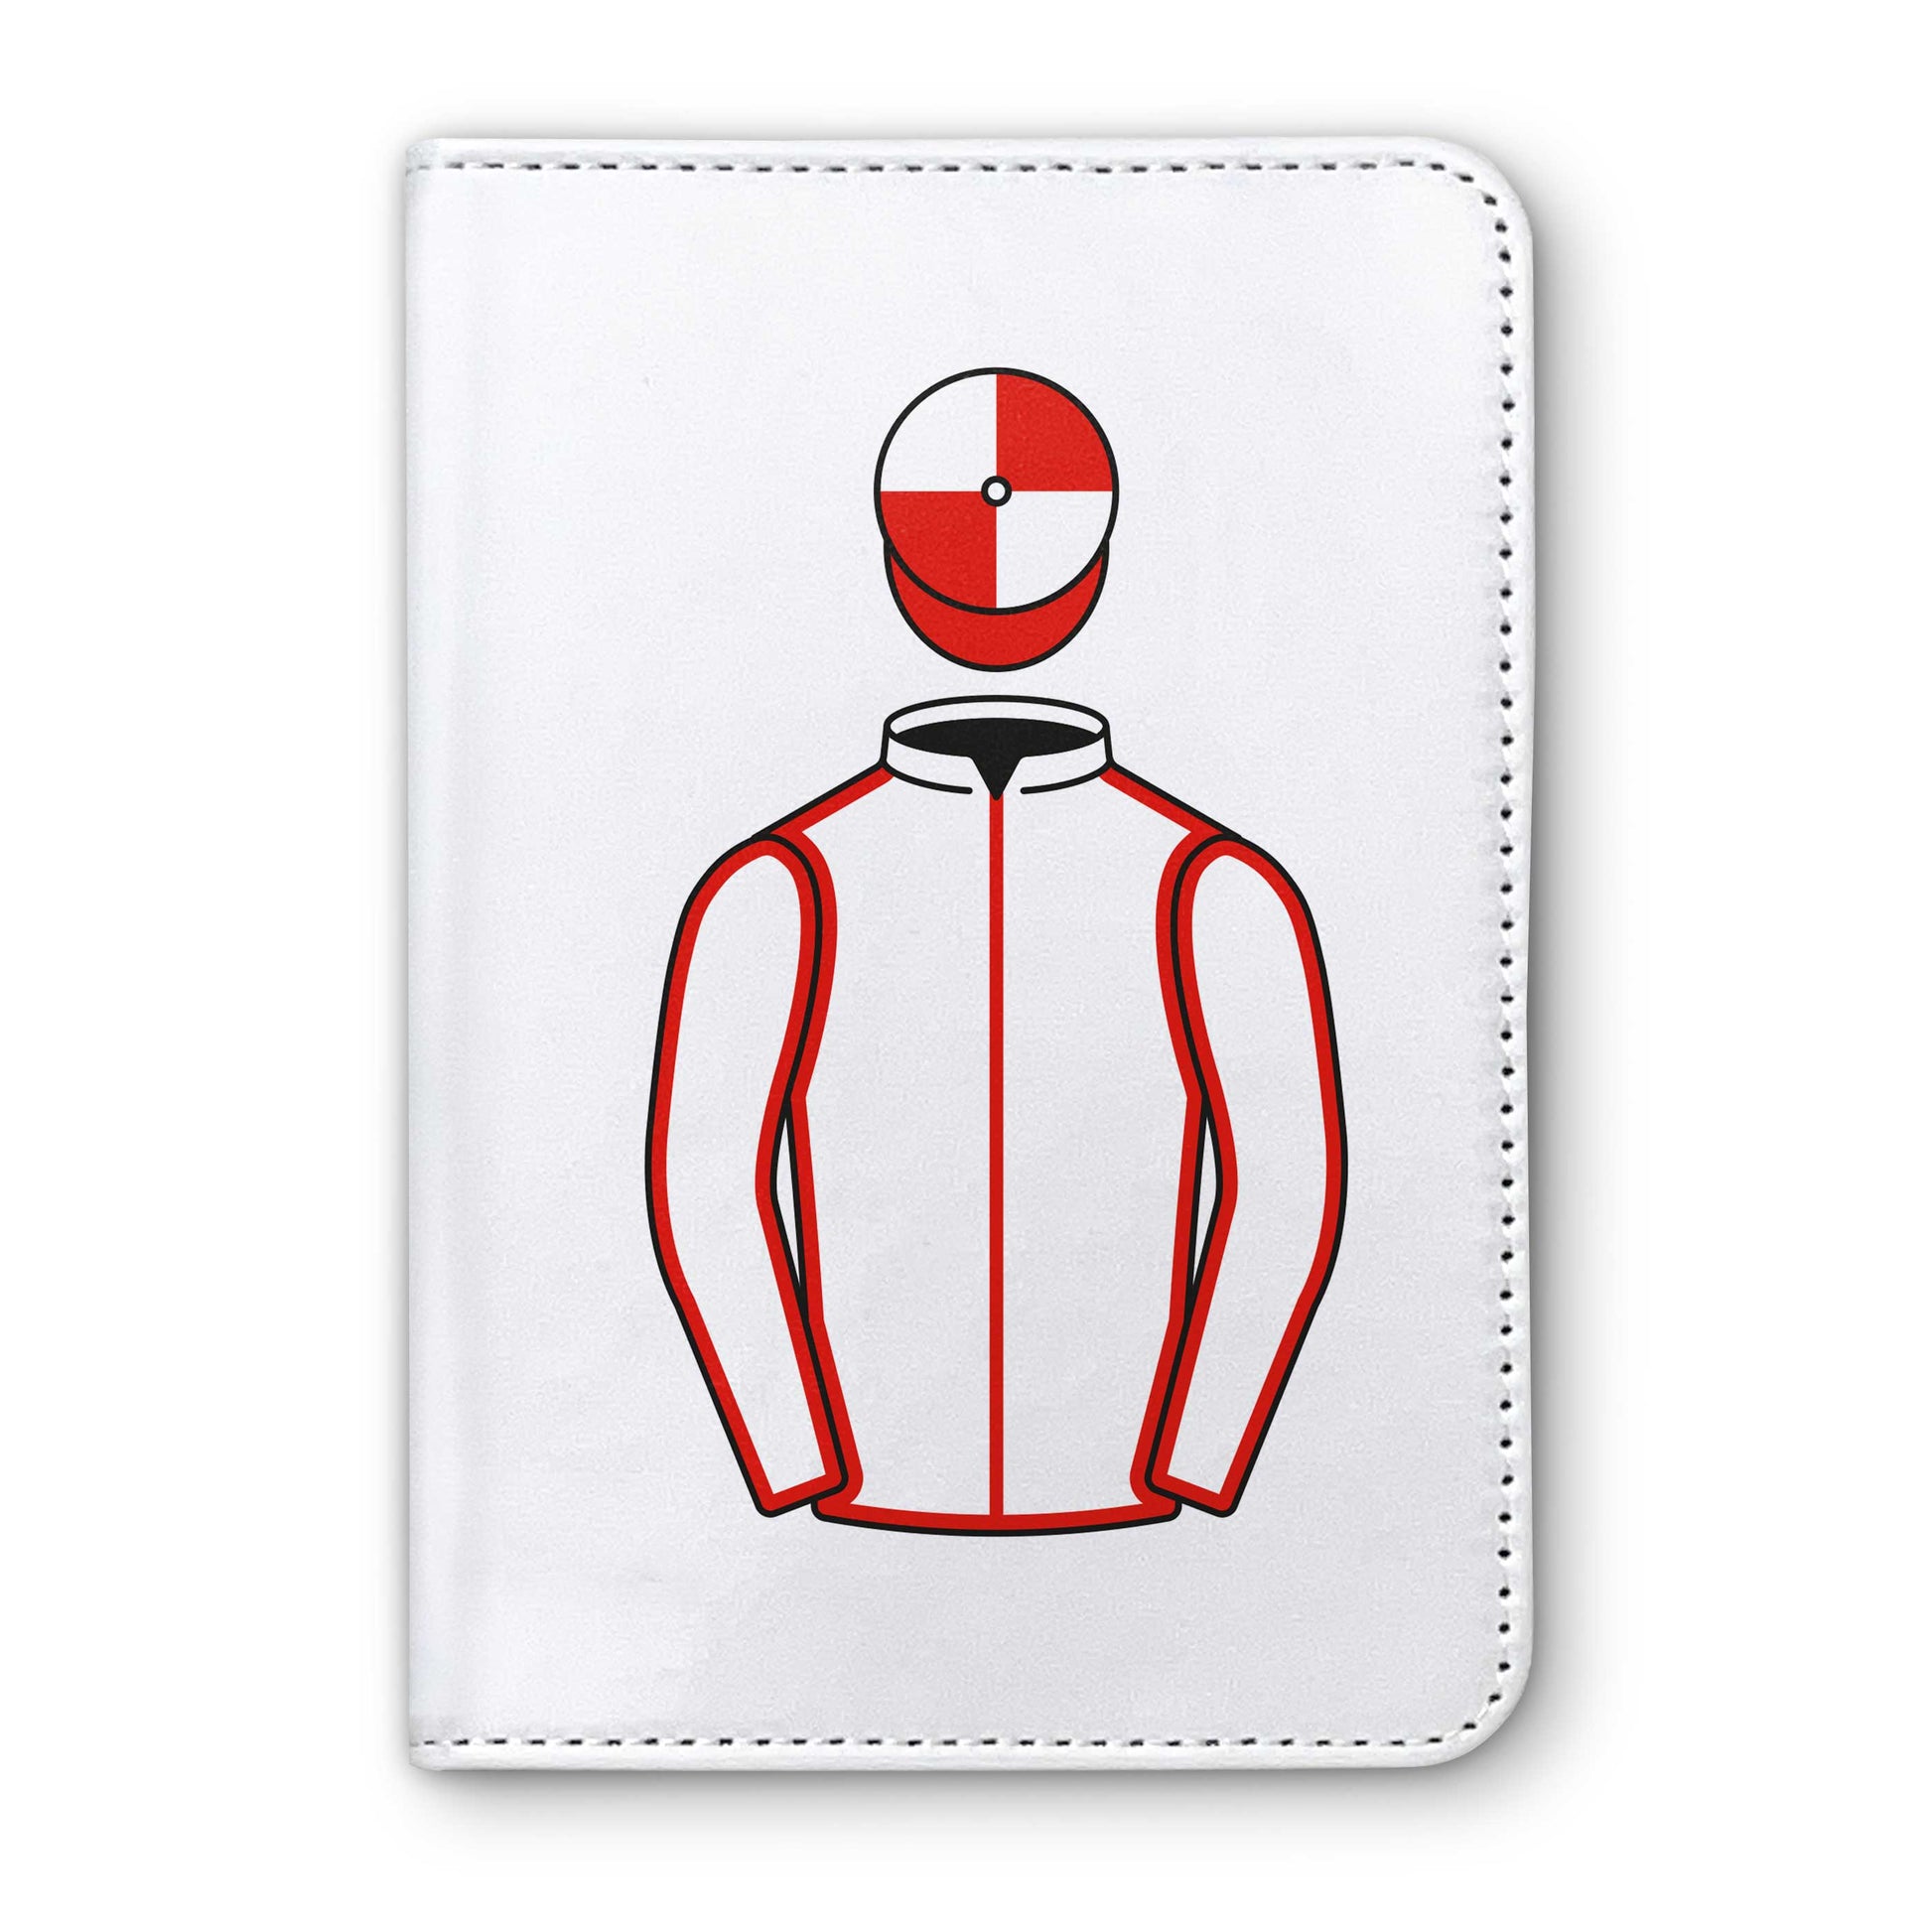 HP Racing Who Dares Wins  Horse Racing Passport Holder - Hacked Up Horse Racing Gifts